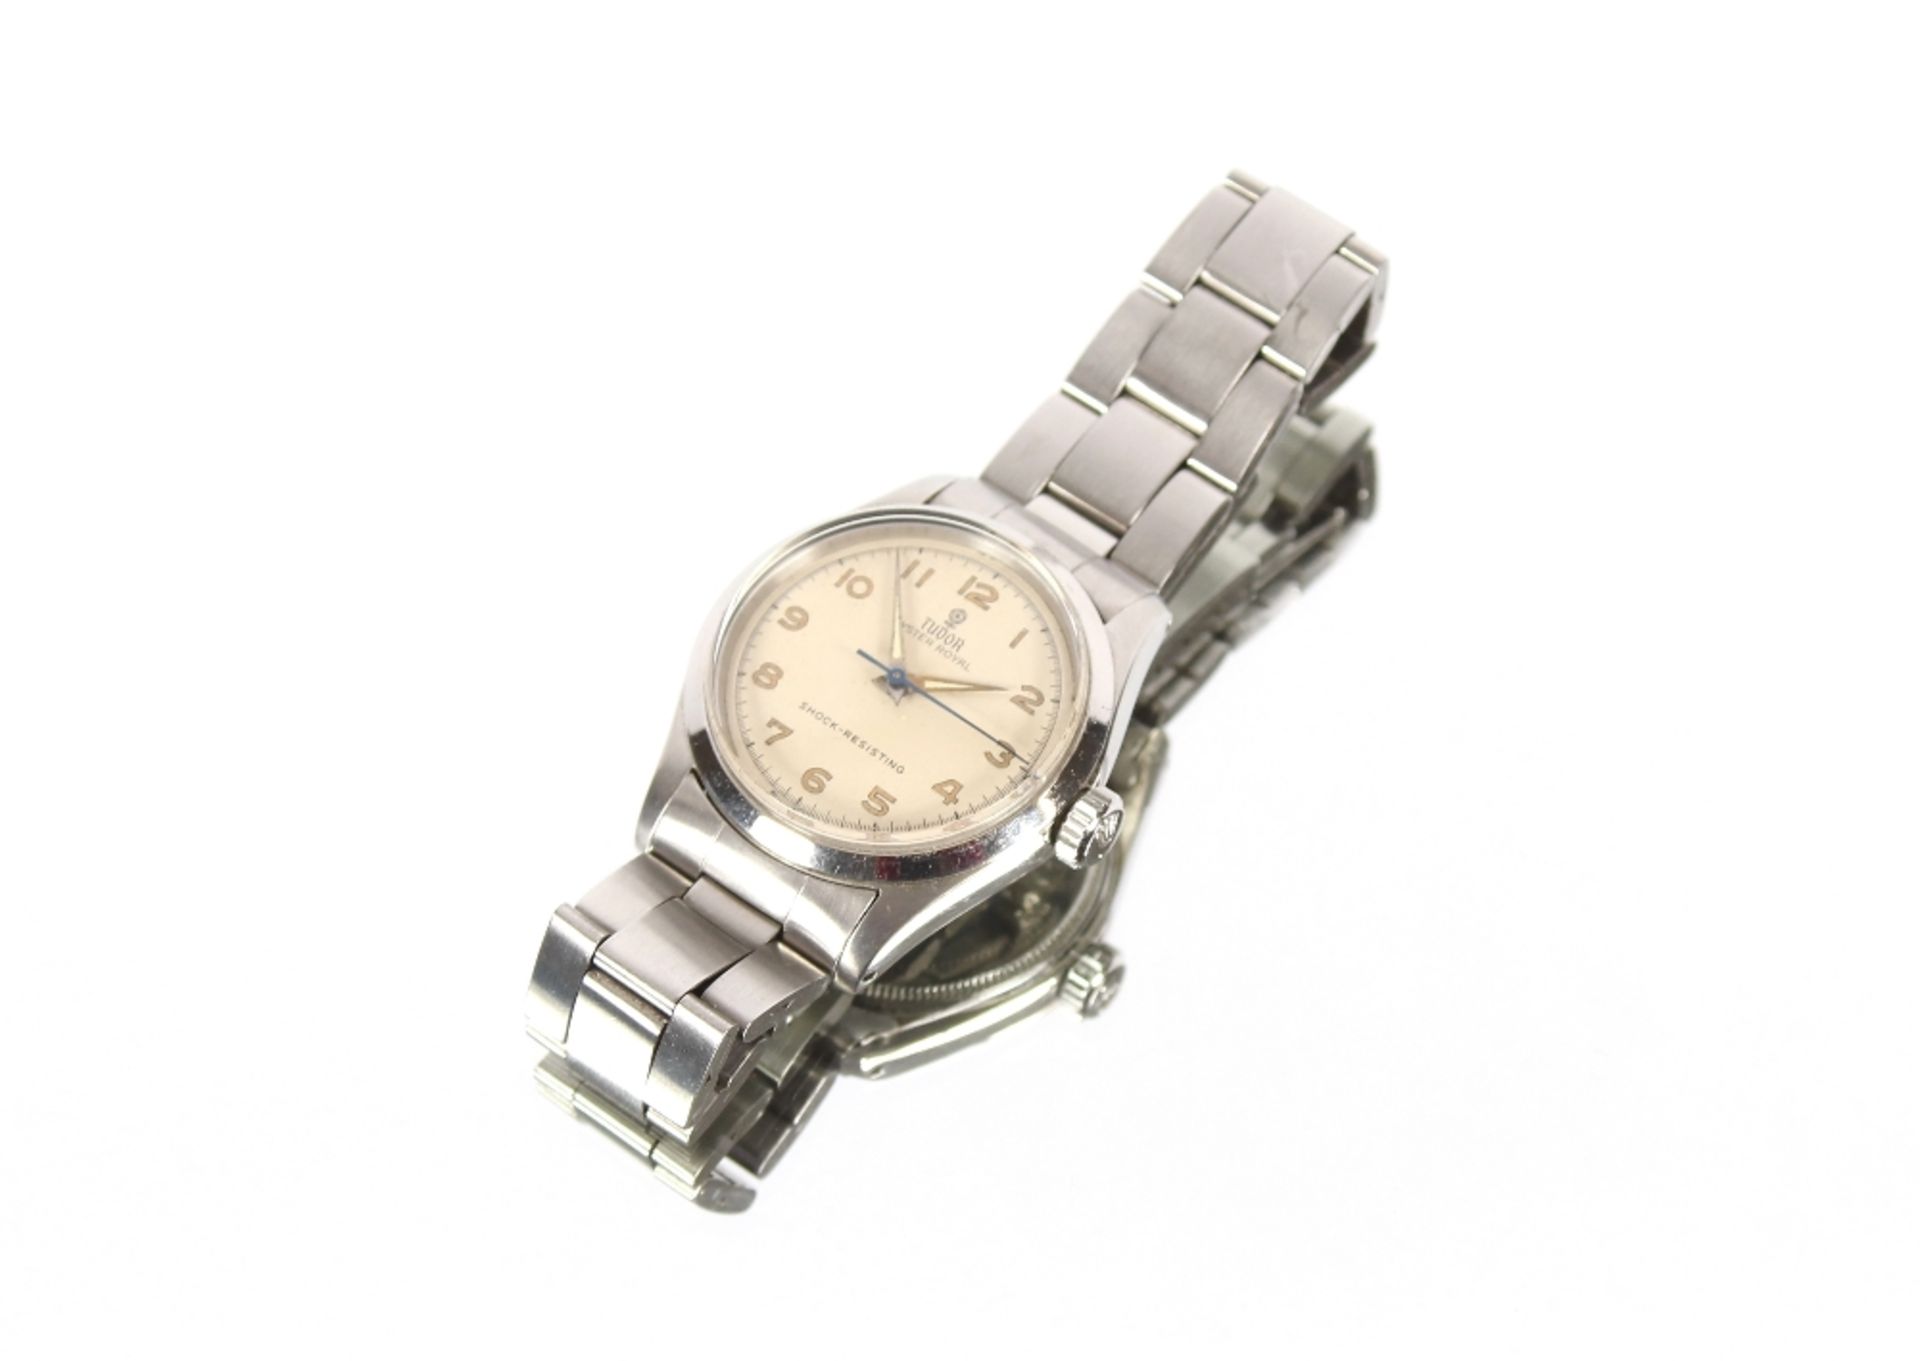 A Tudor Oyster Royale gent's wrist watch